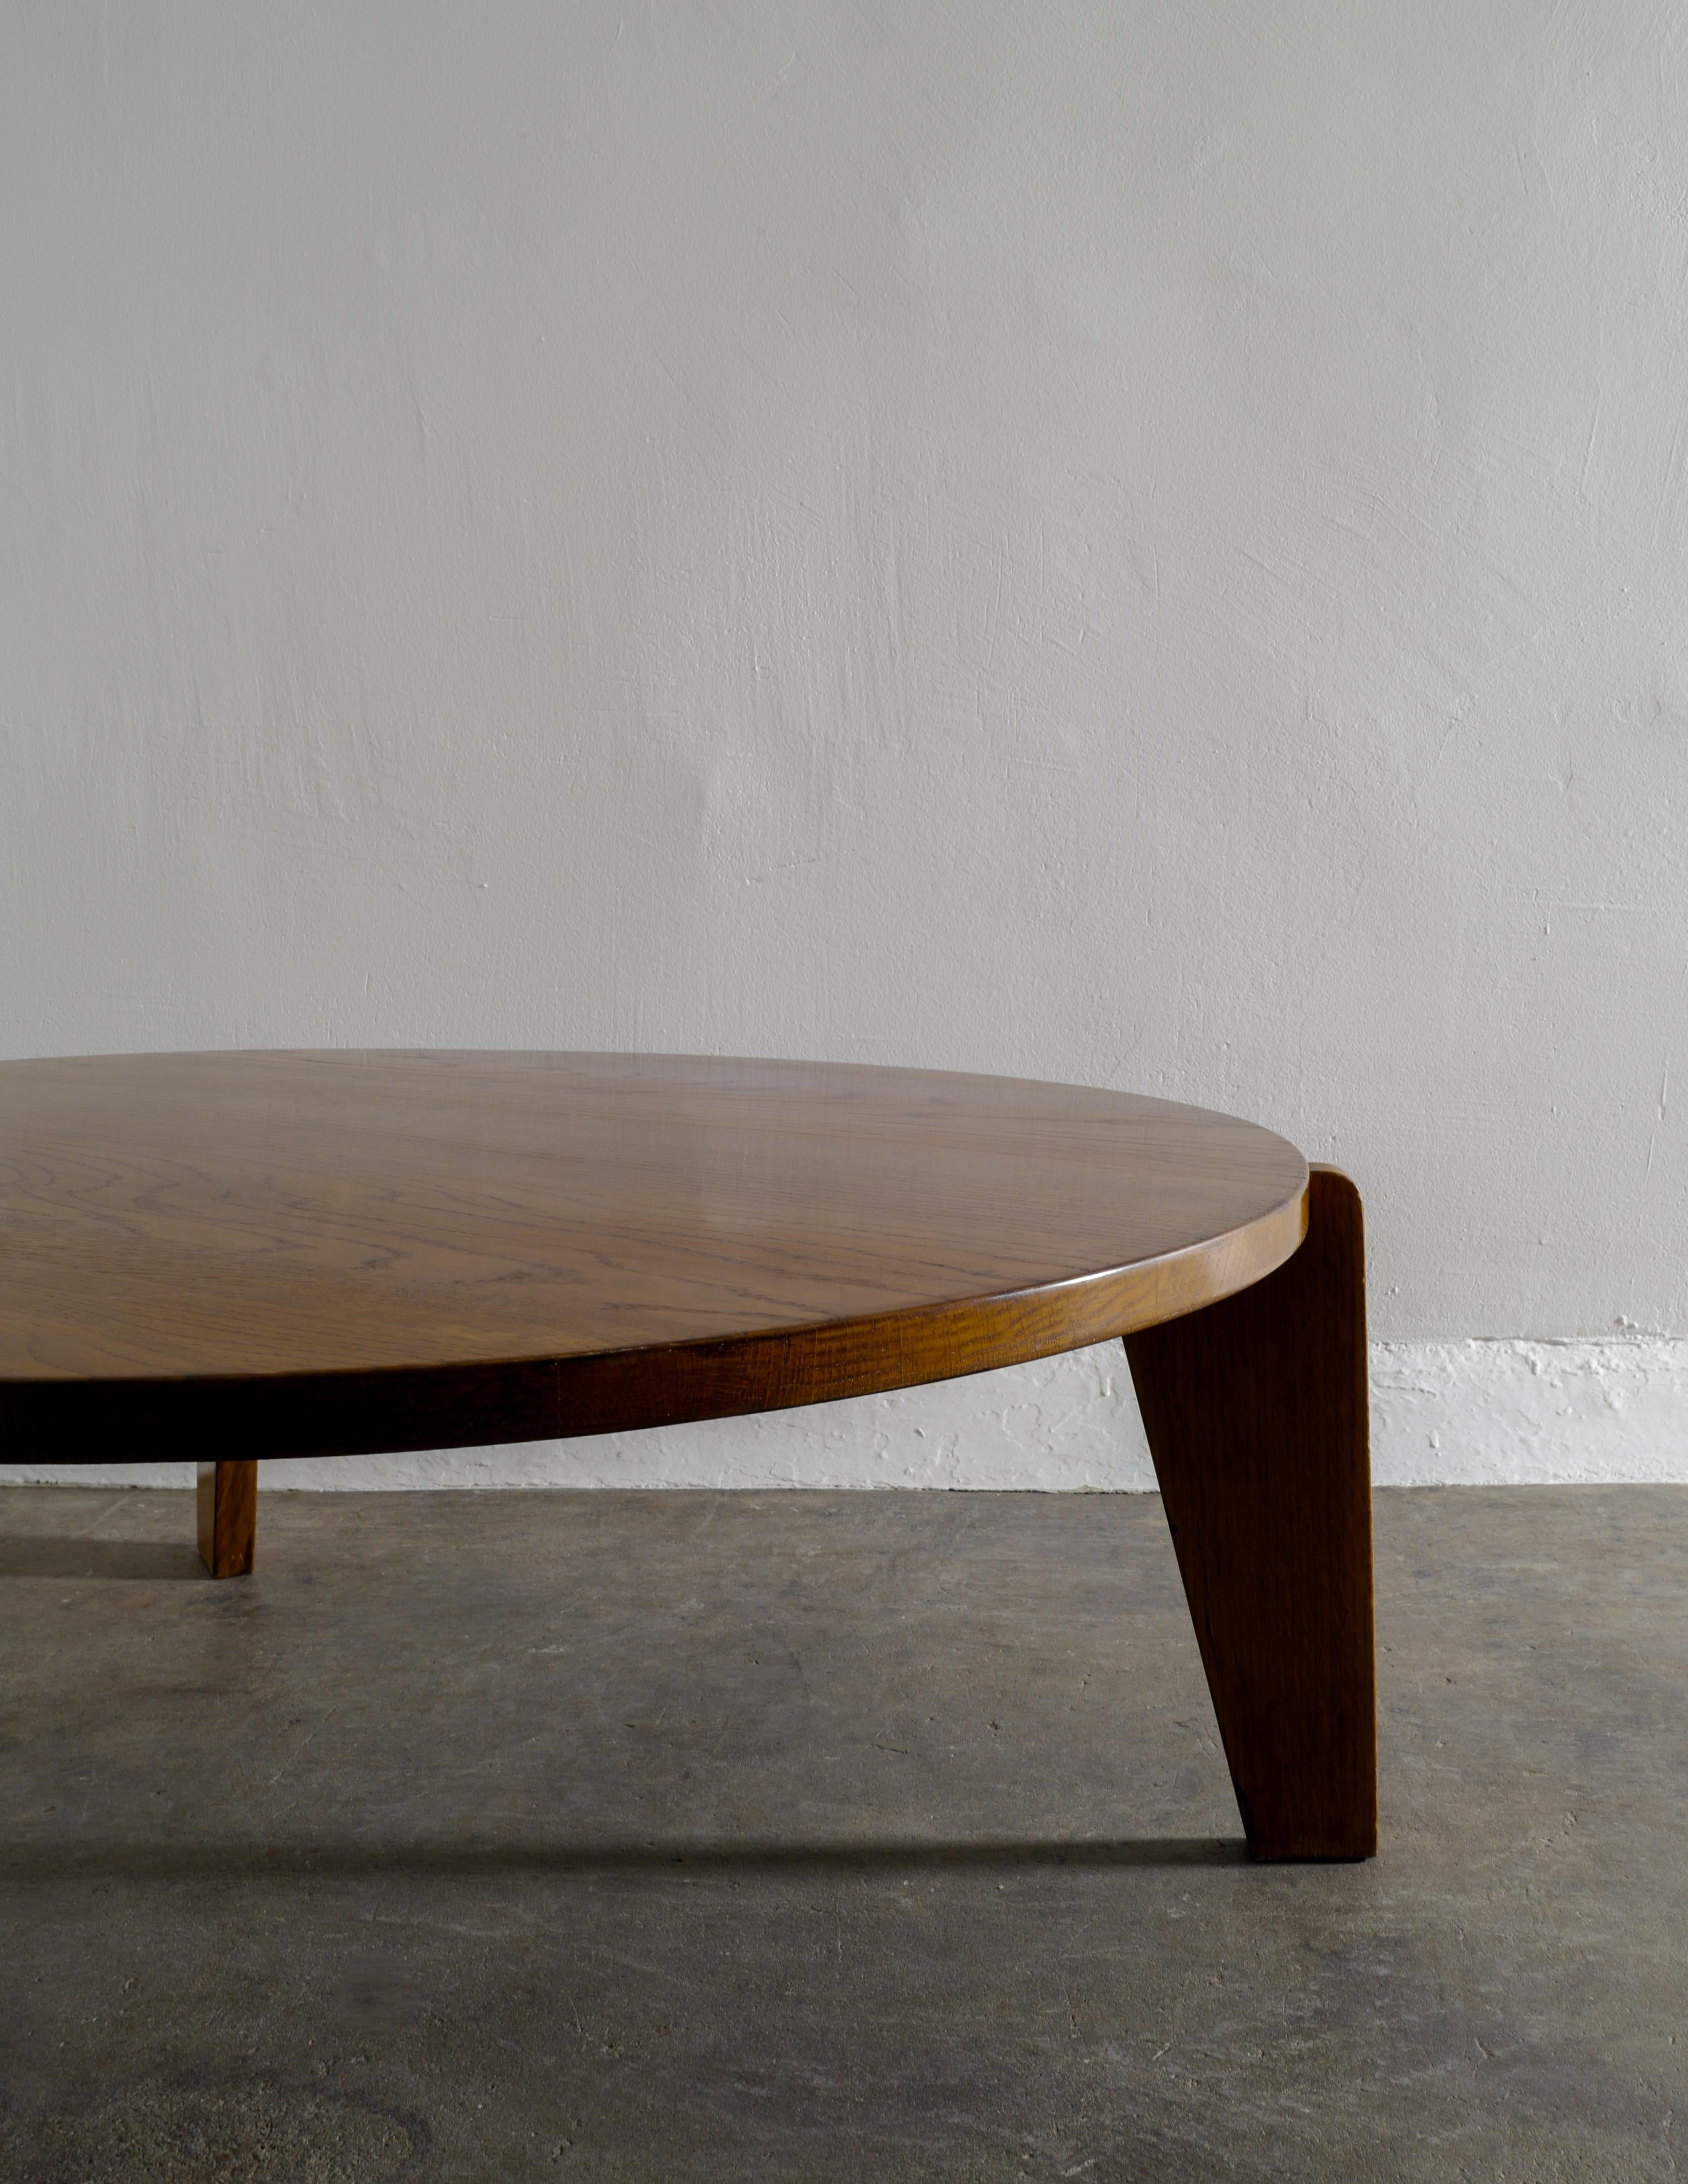 French Coffee Table in style of Jean Prouvé 